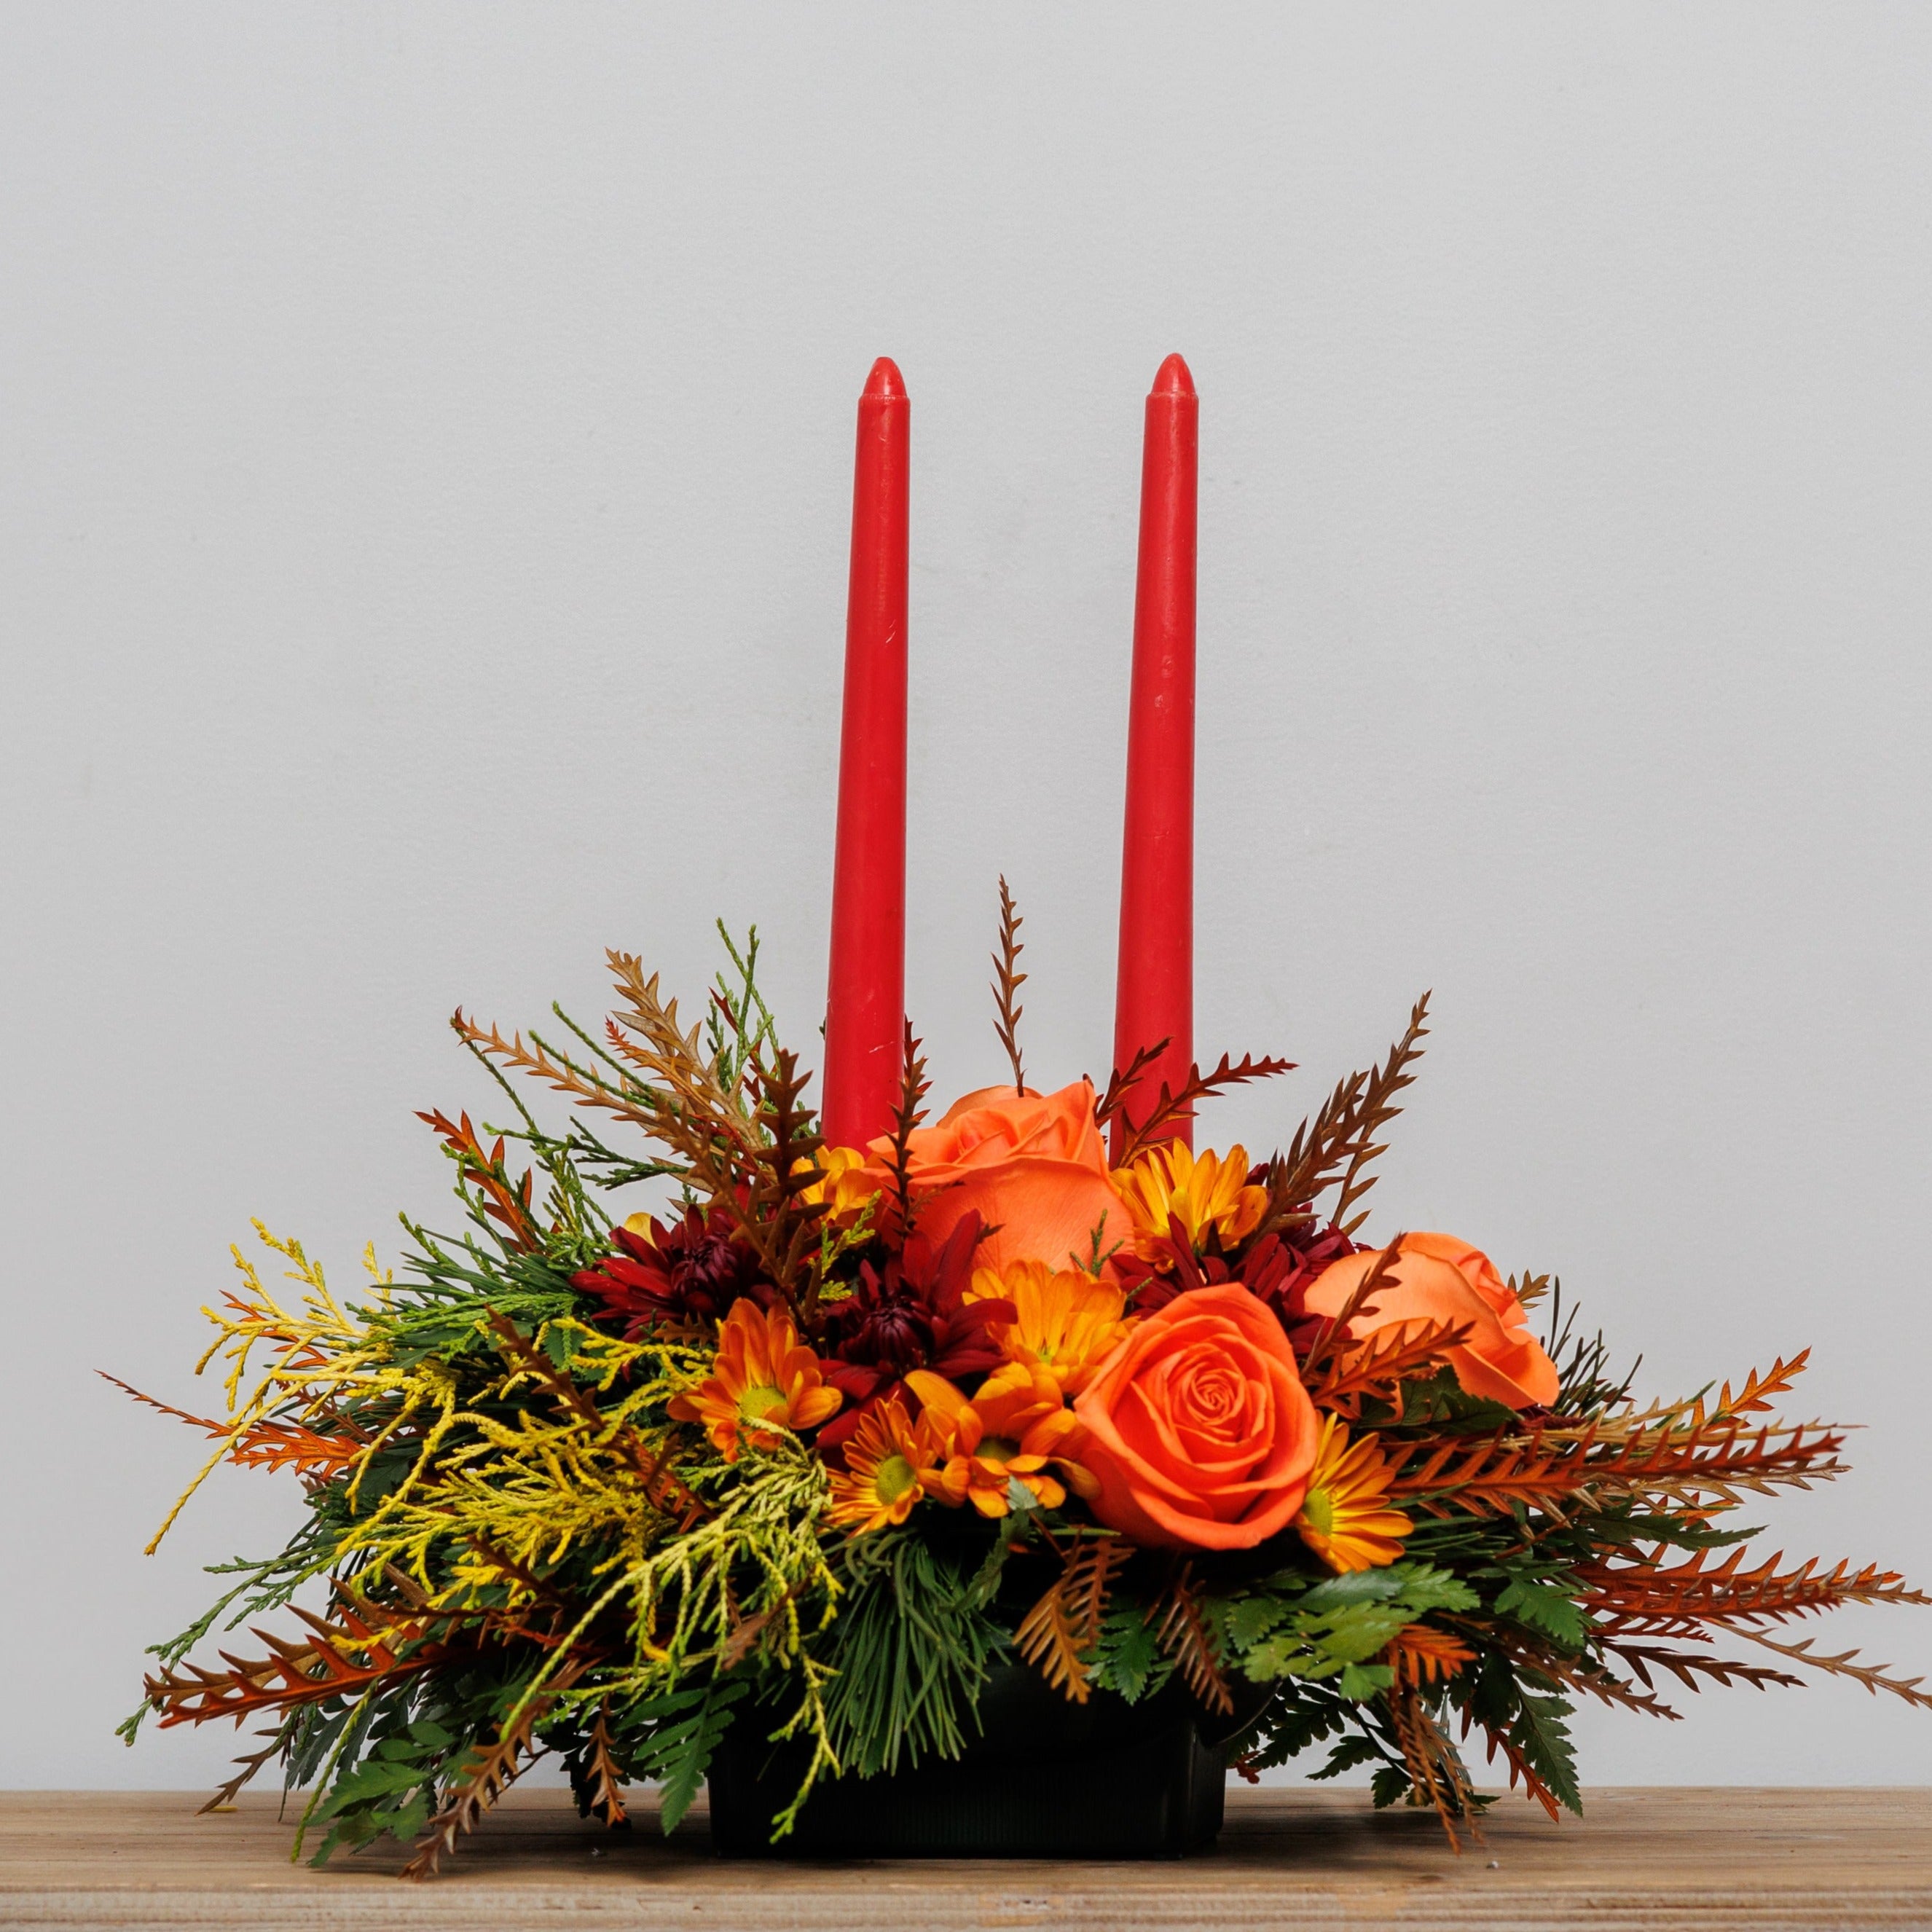 A fall centerpiece with orange roses, fall foliage and 2 red taper candles.